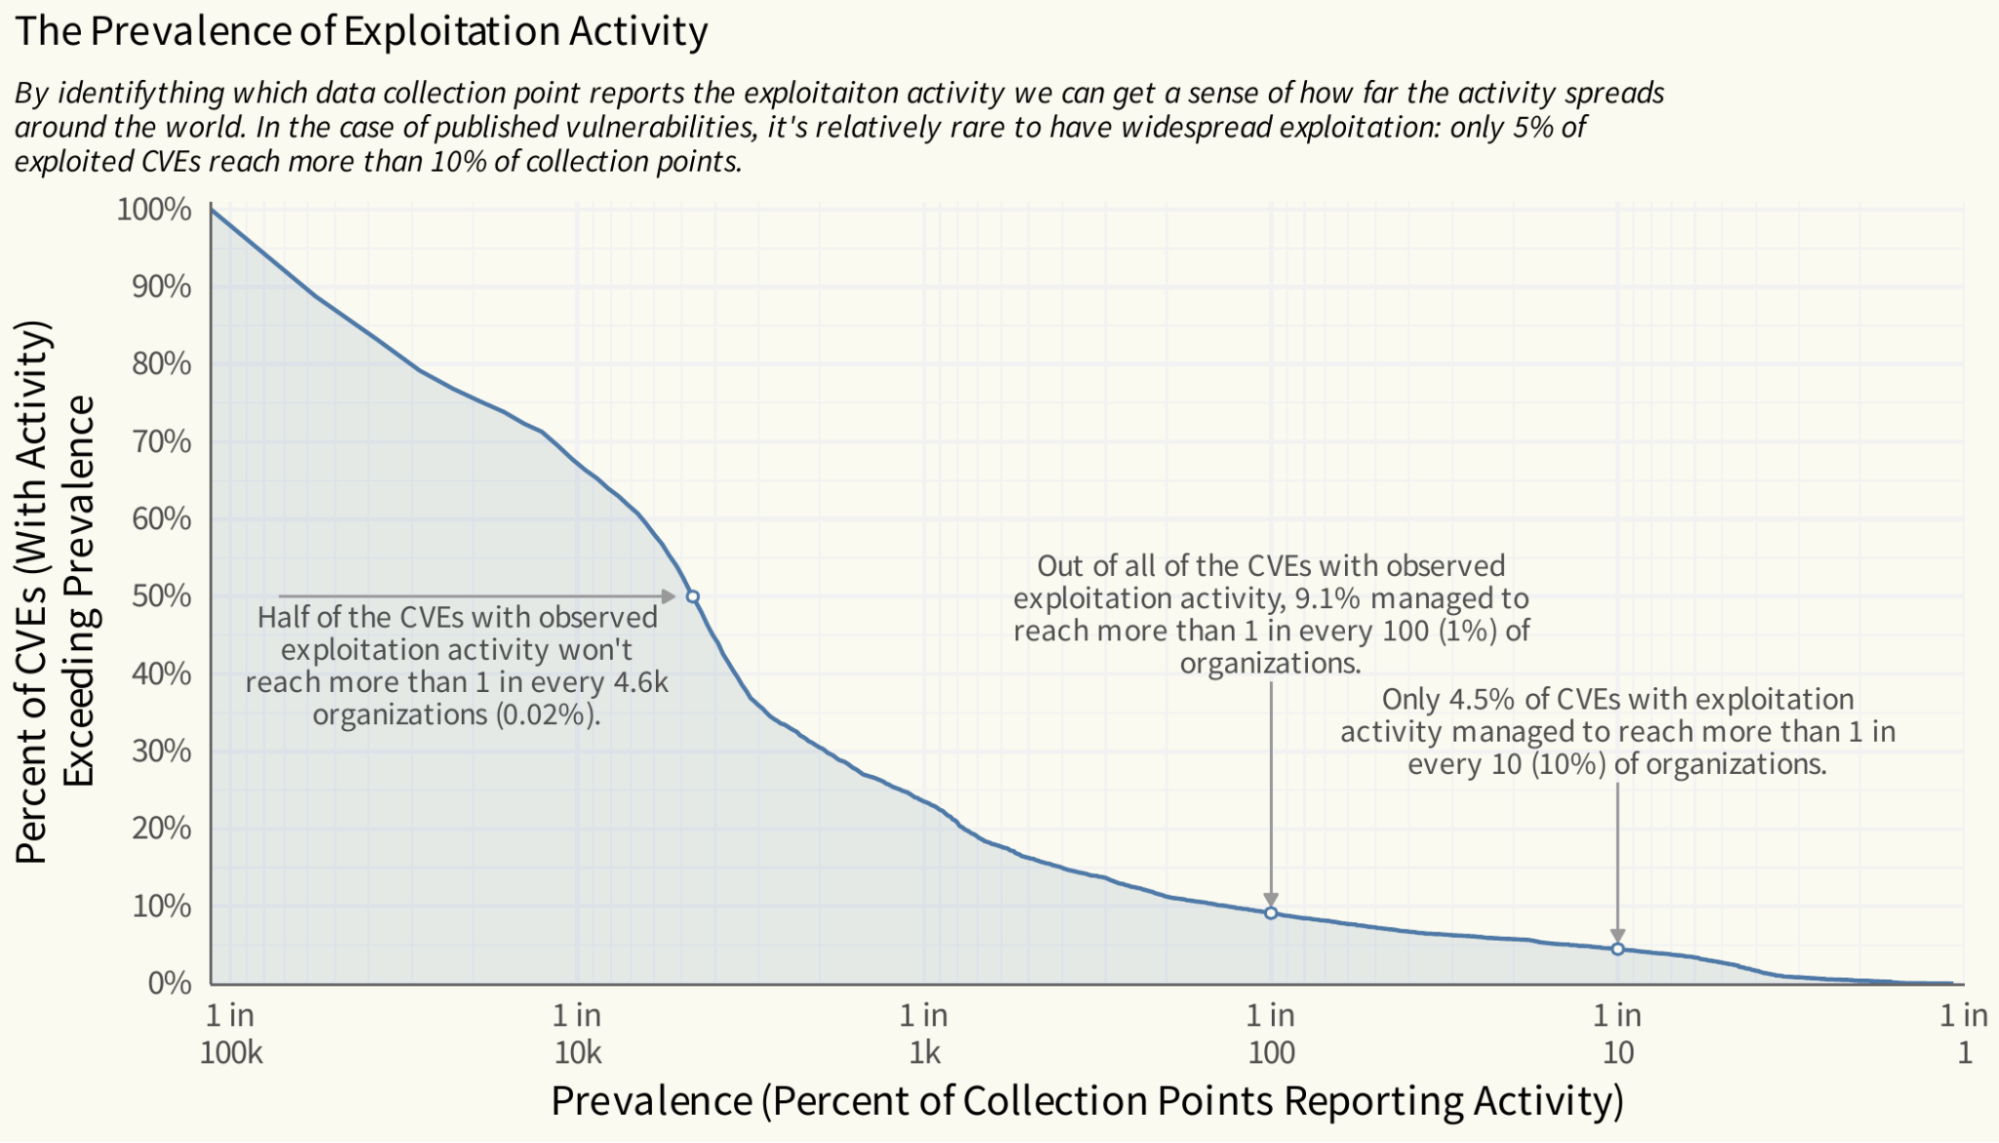 Image shows The Prevalence of Exploitation Activity 